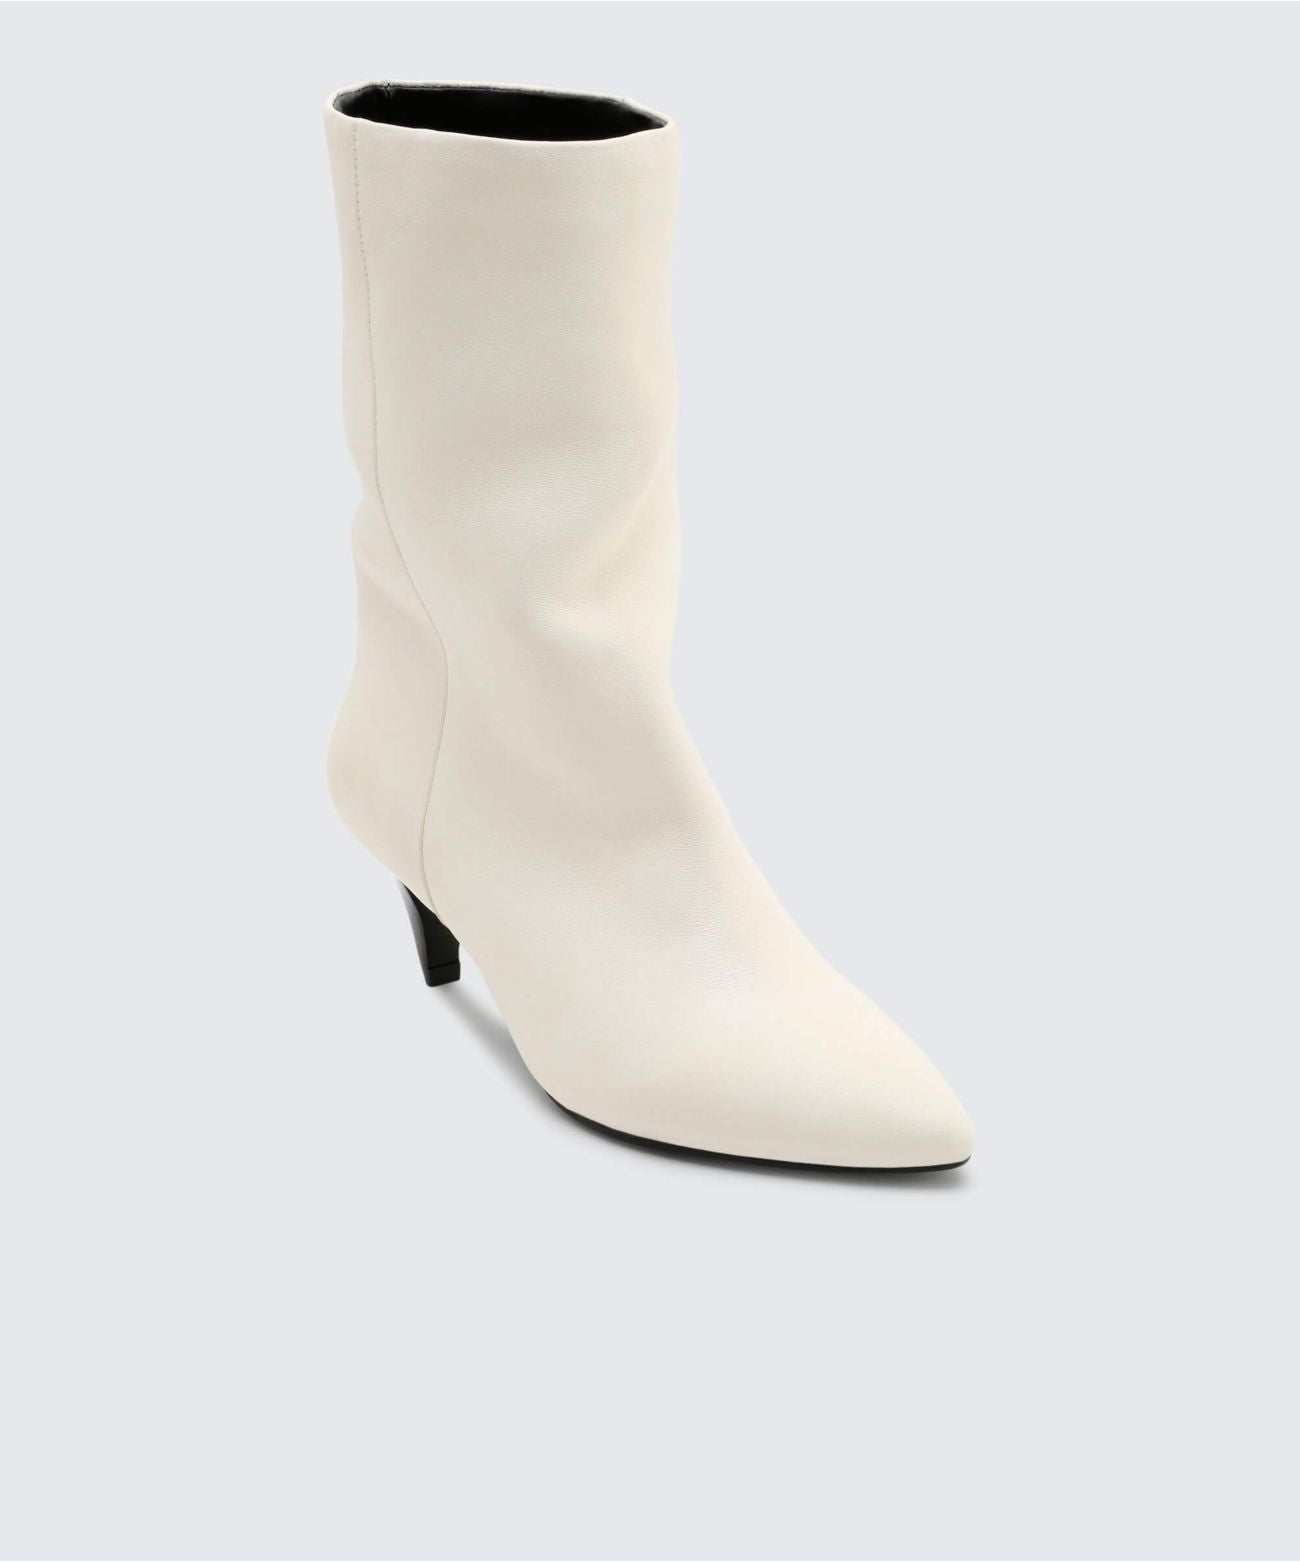 dolce vita slouch boot